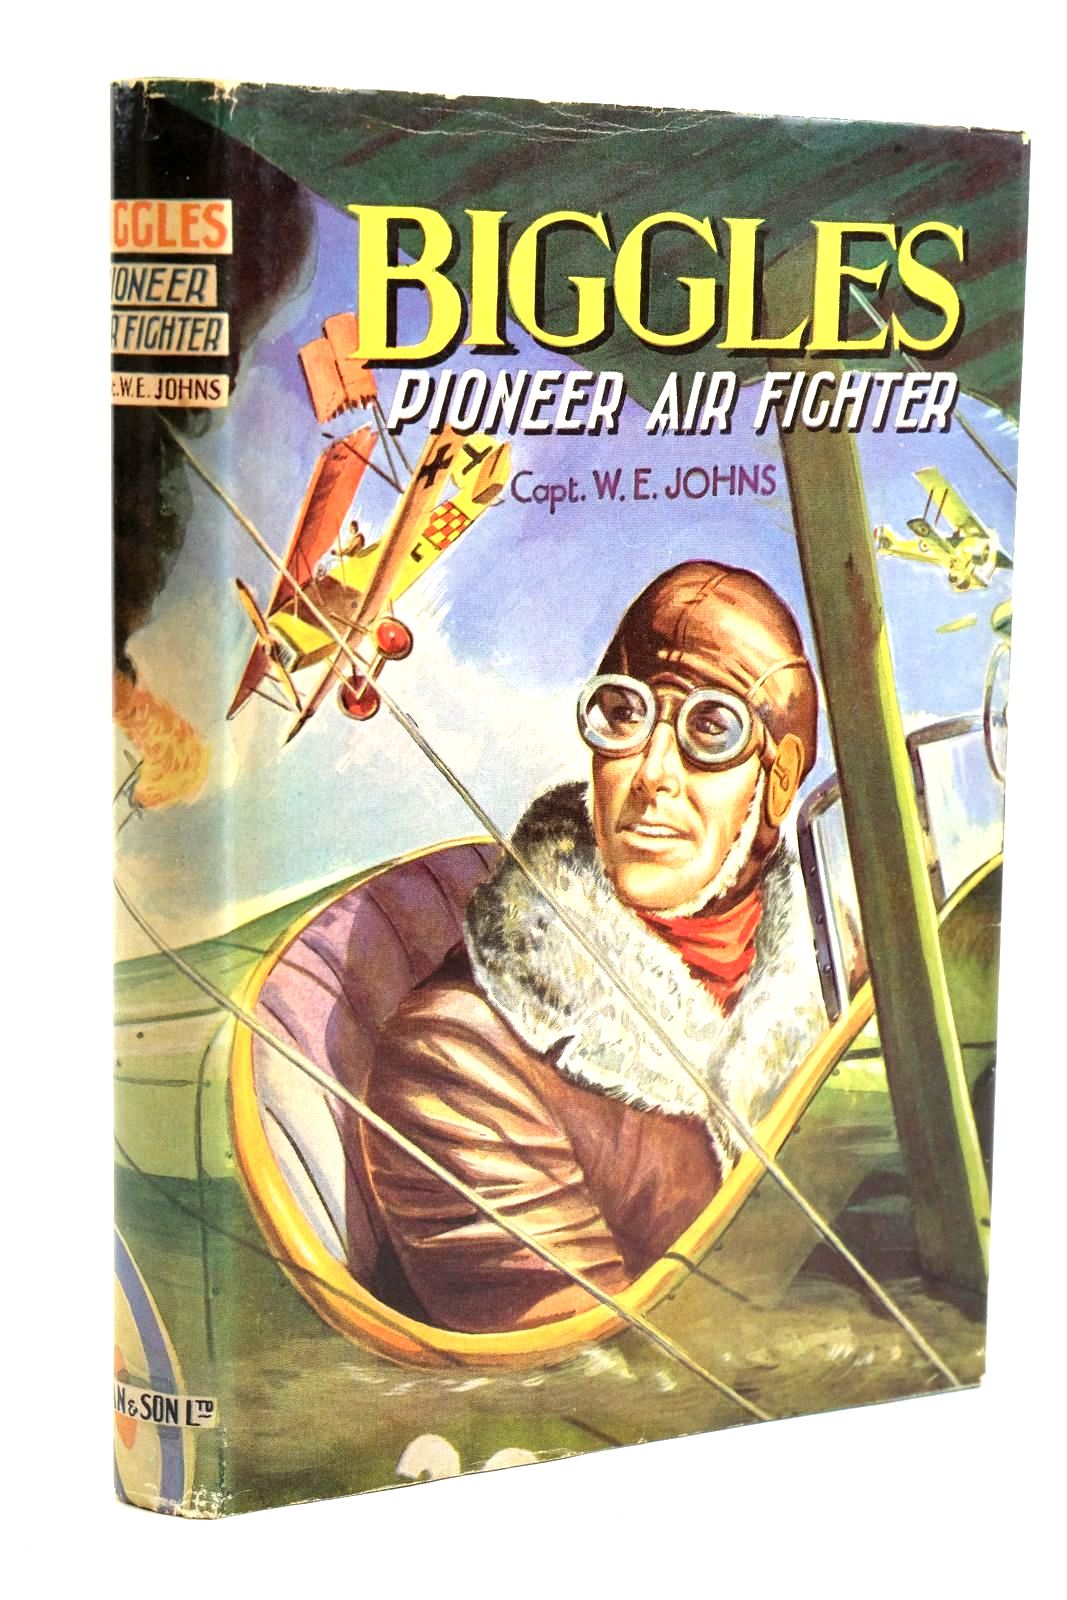 Photo of BIGGLES PIONEER AIR FIGHTER written by Johns, W.E. published by Dean &amp; Son Ltd. (STOCK CODE: 1320703)  for sale by Stella & Rose's Books